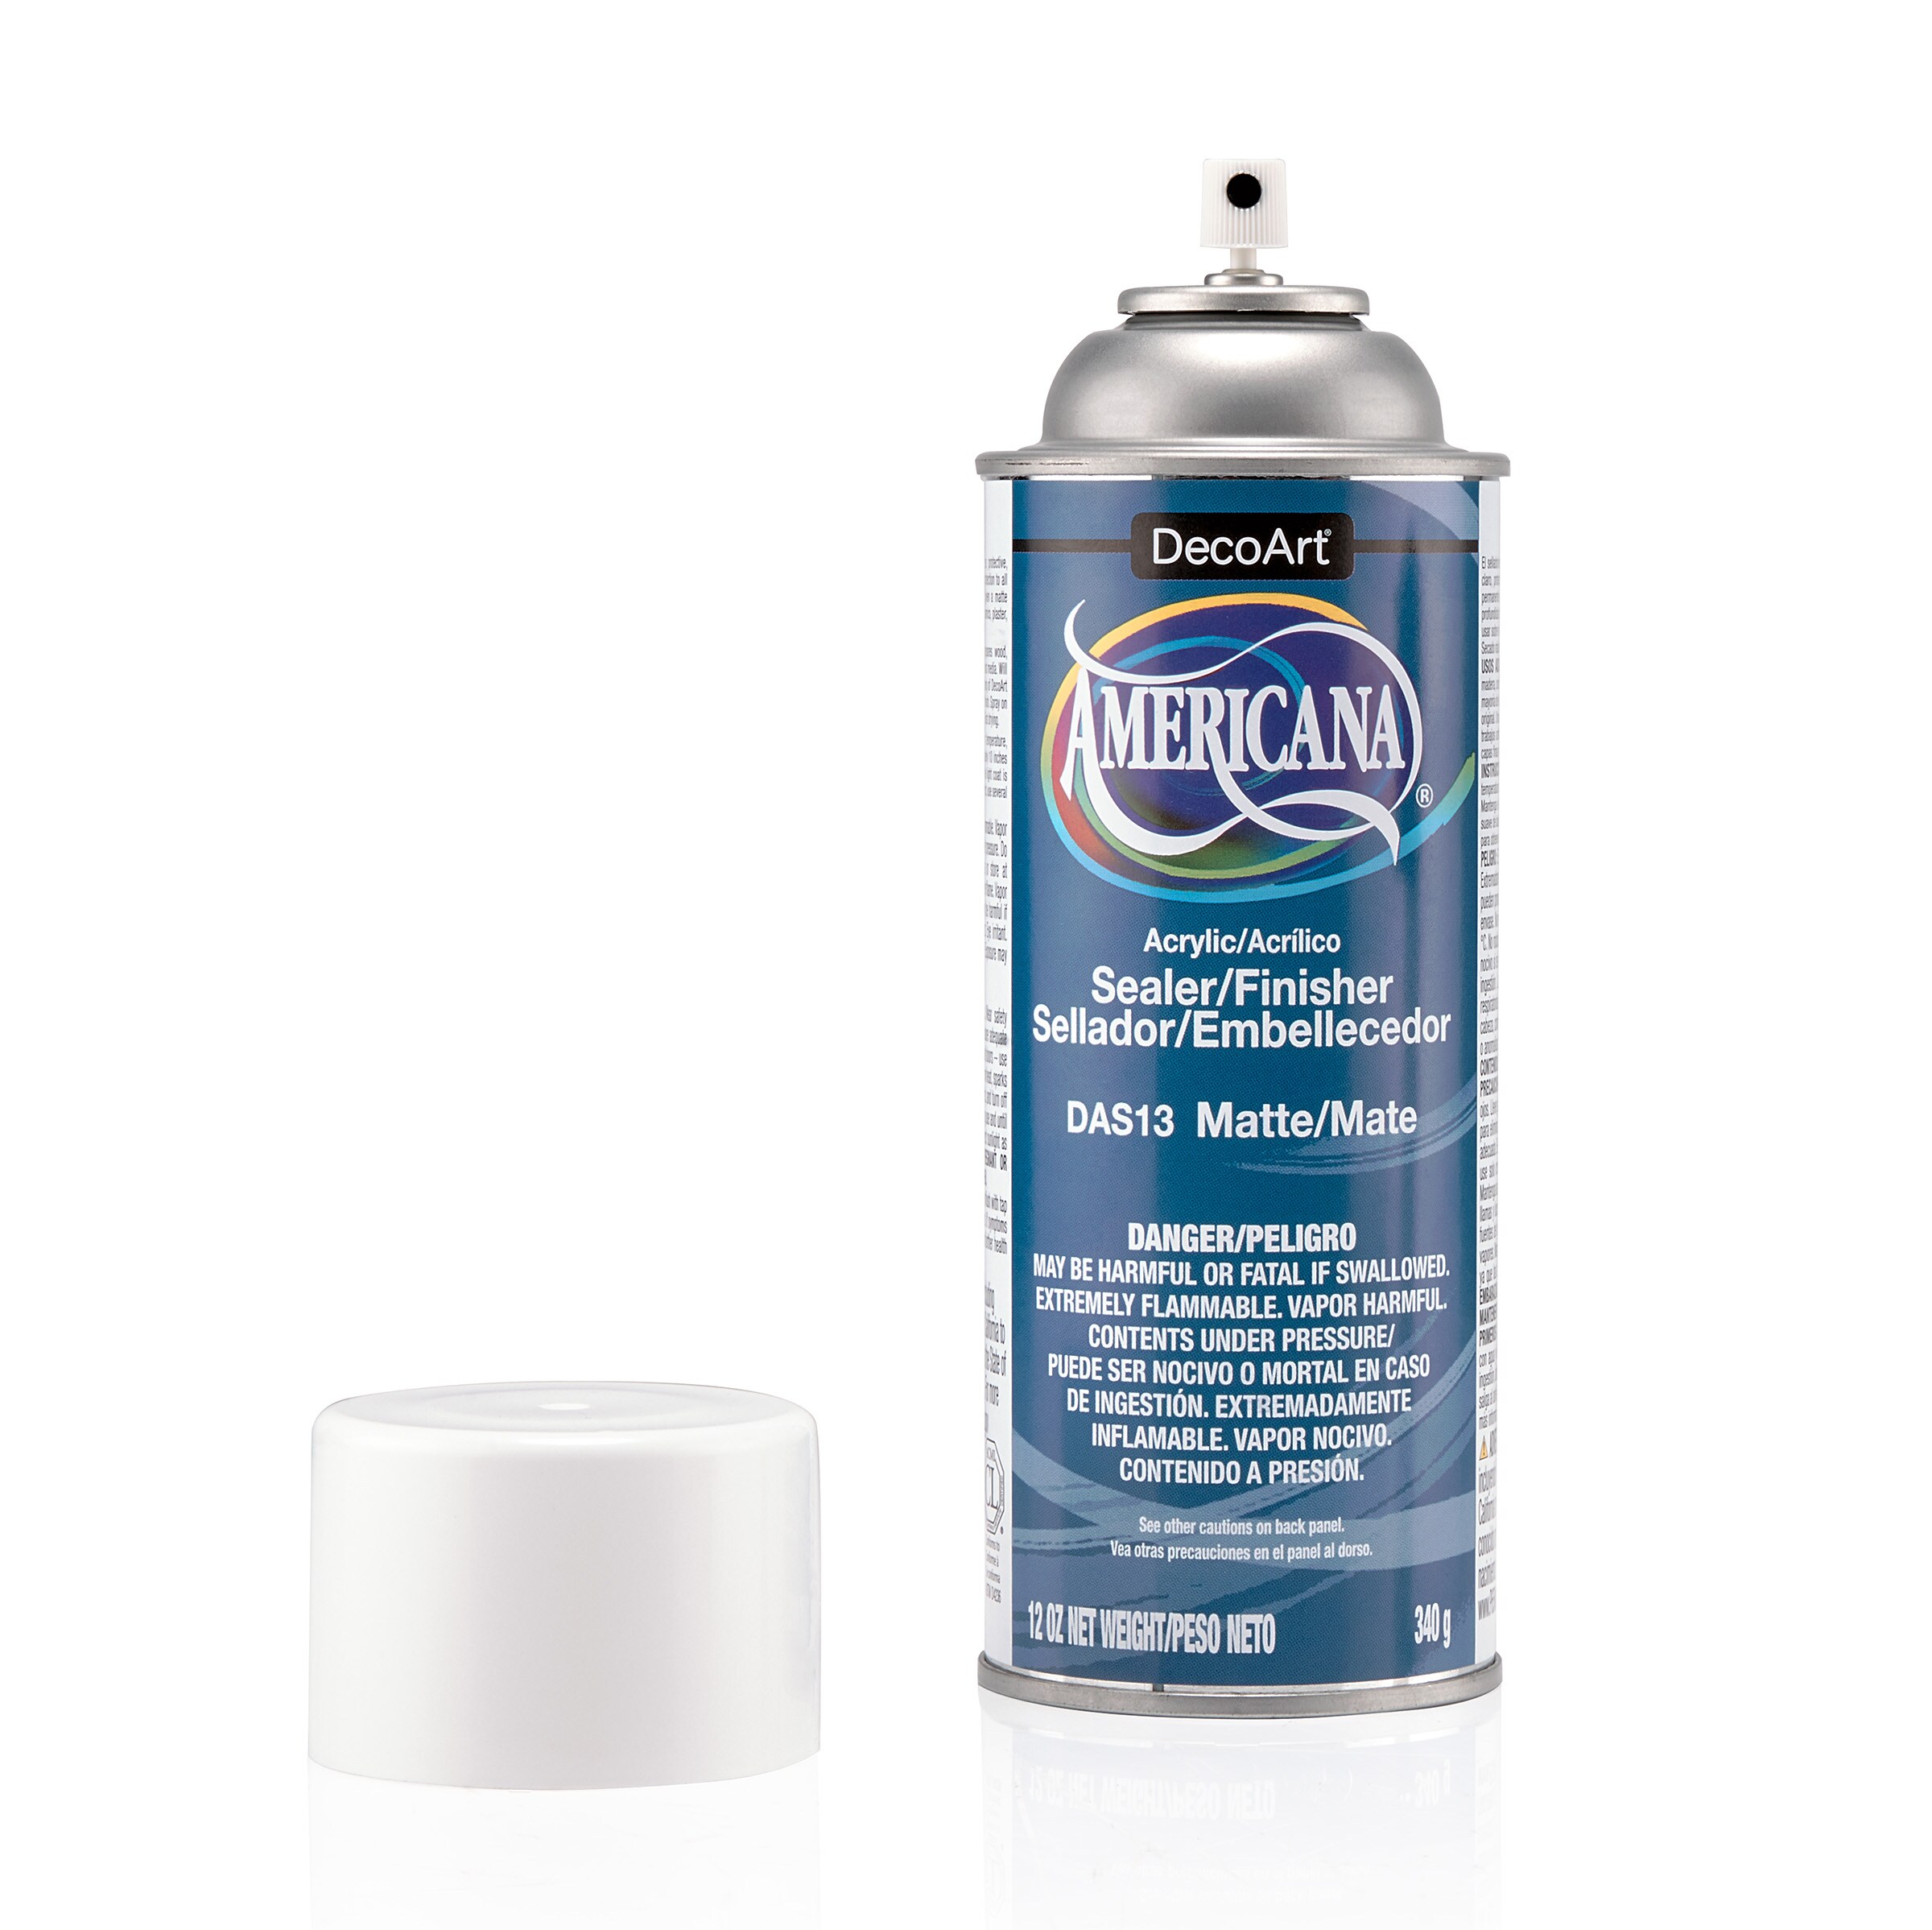 American Clay Spray – All American Car Care Products